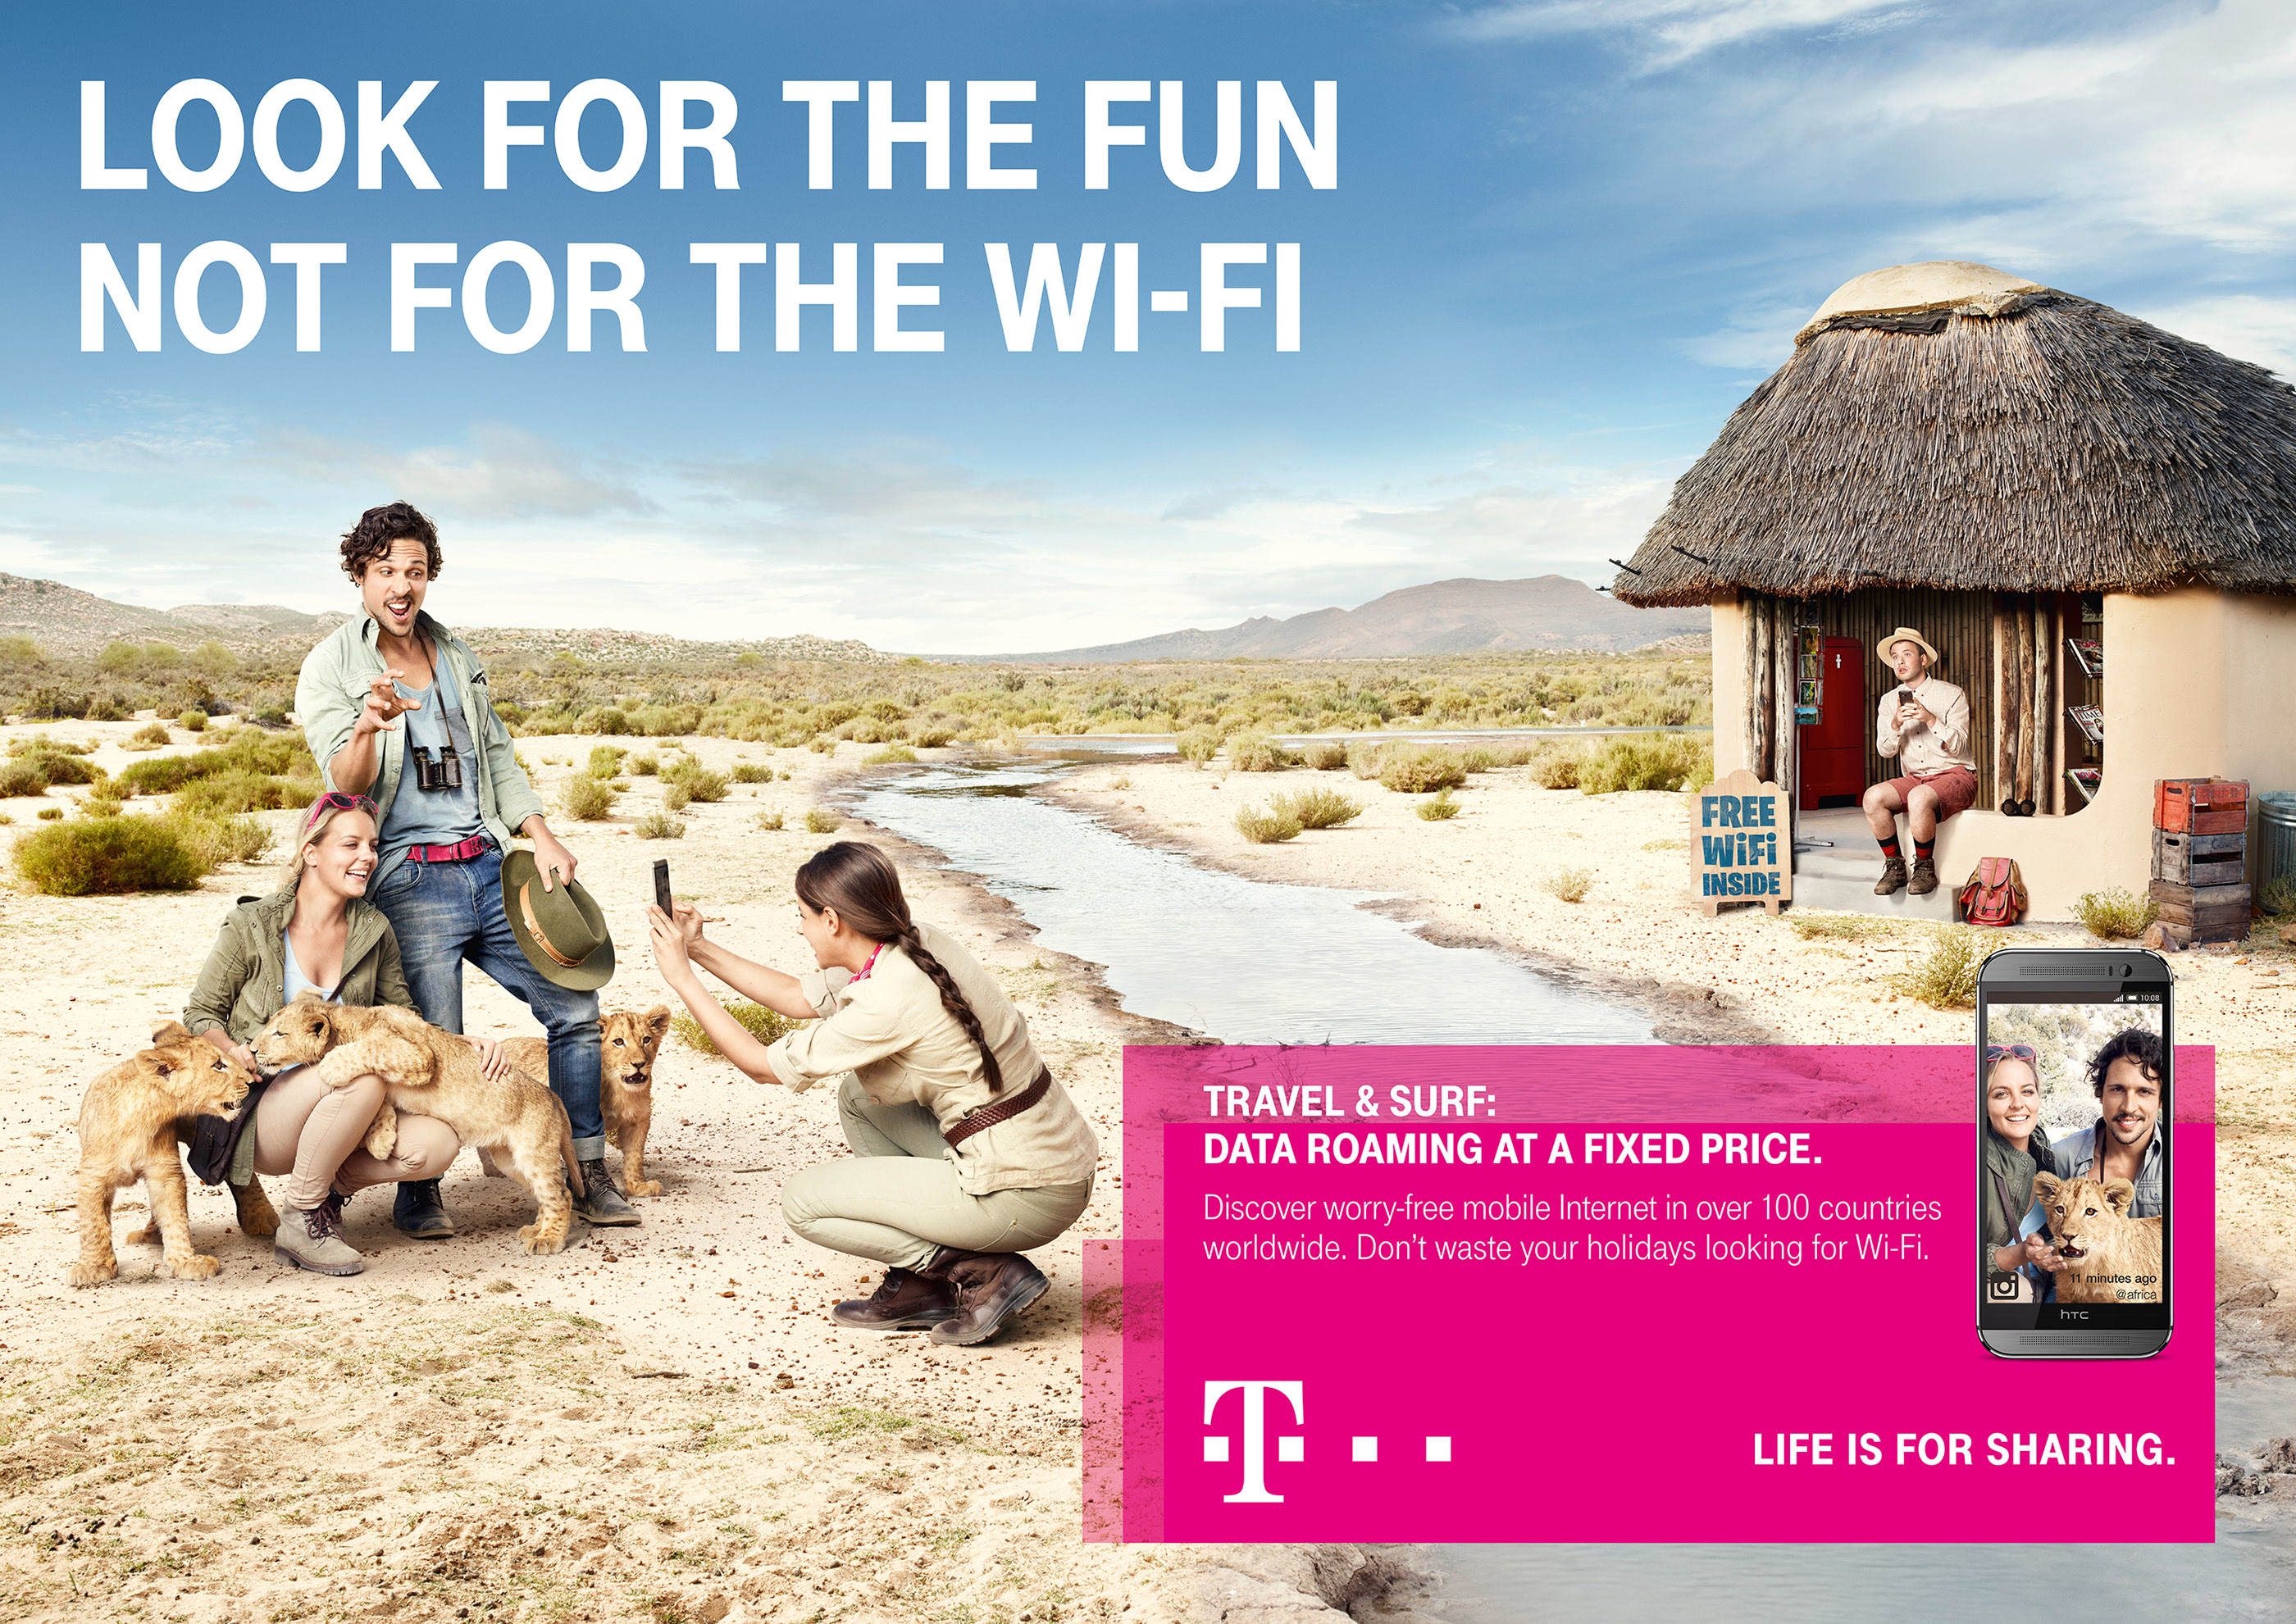 travel and surf pass t mobile